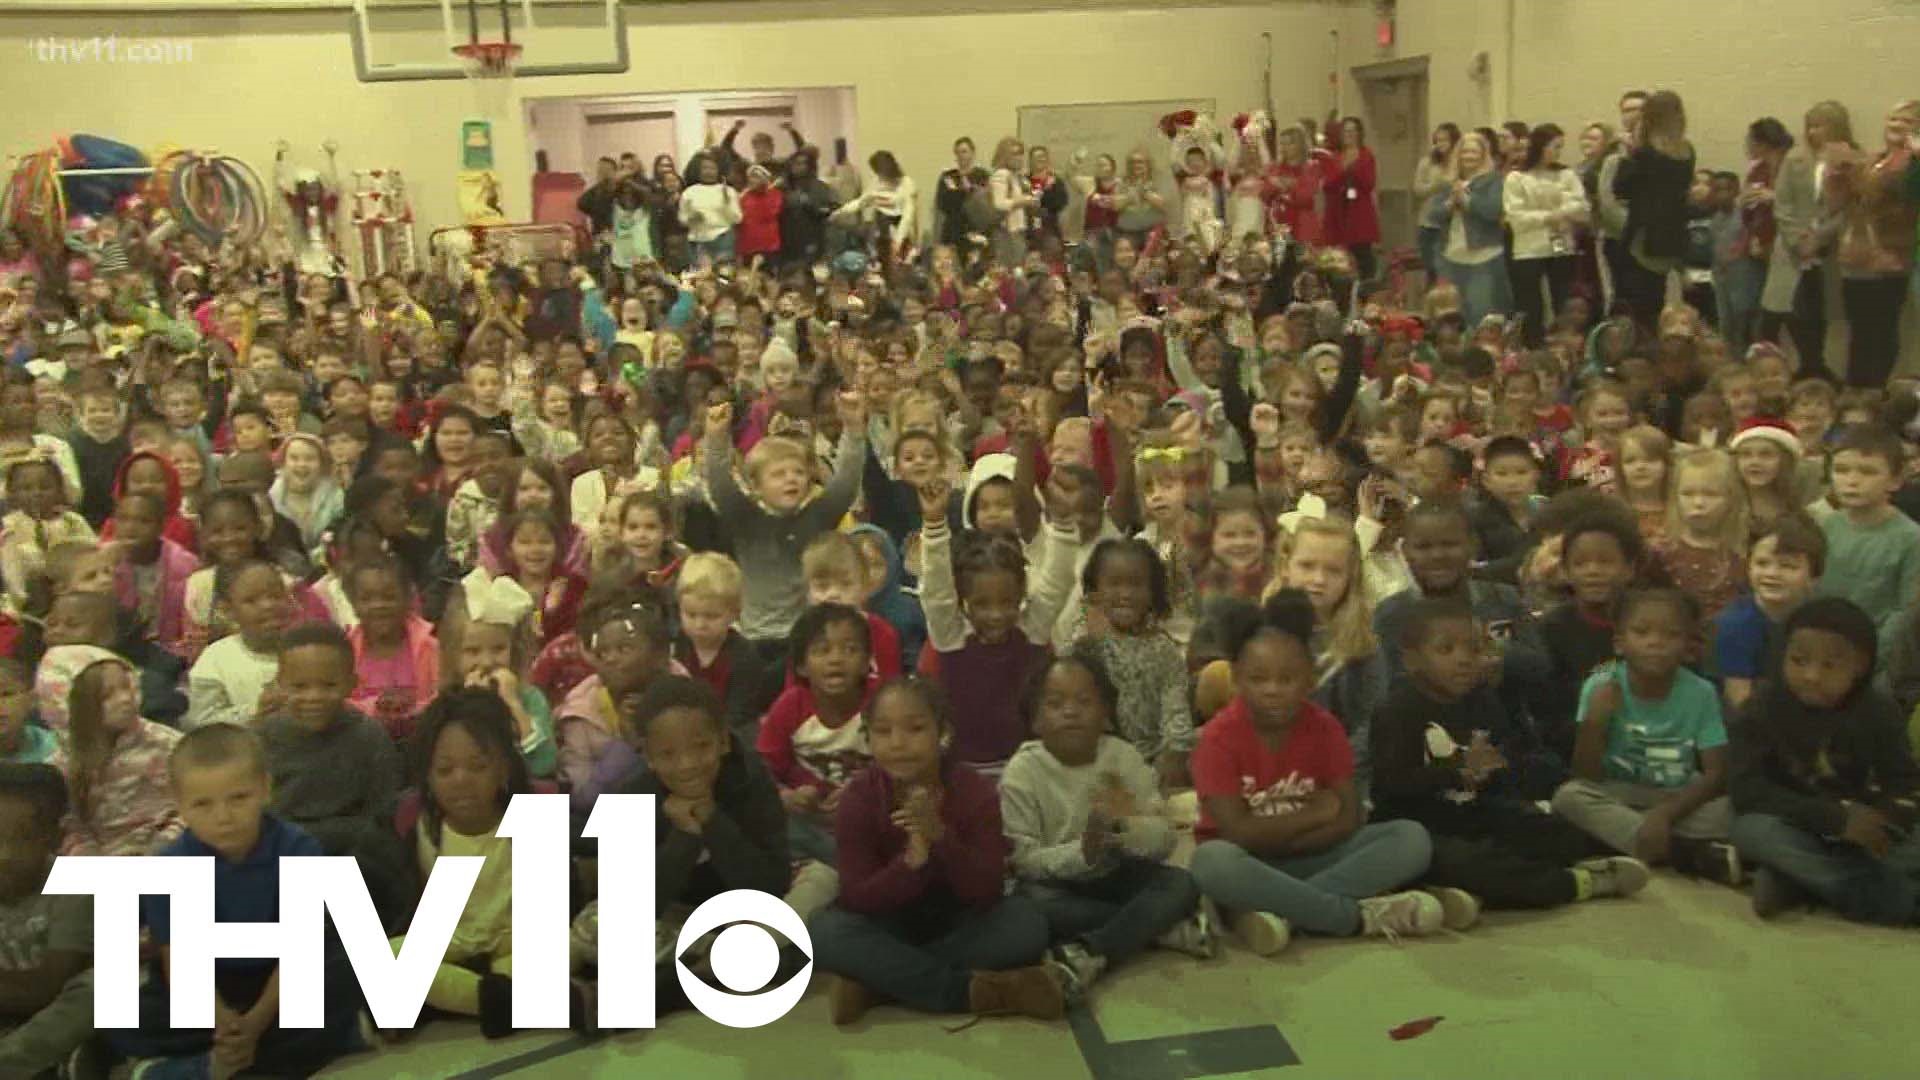 Craig O'Neill visited kids at Eastside Elementary in Magnolia on his Reading Road Trip.